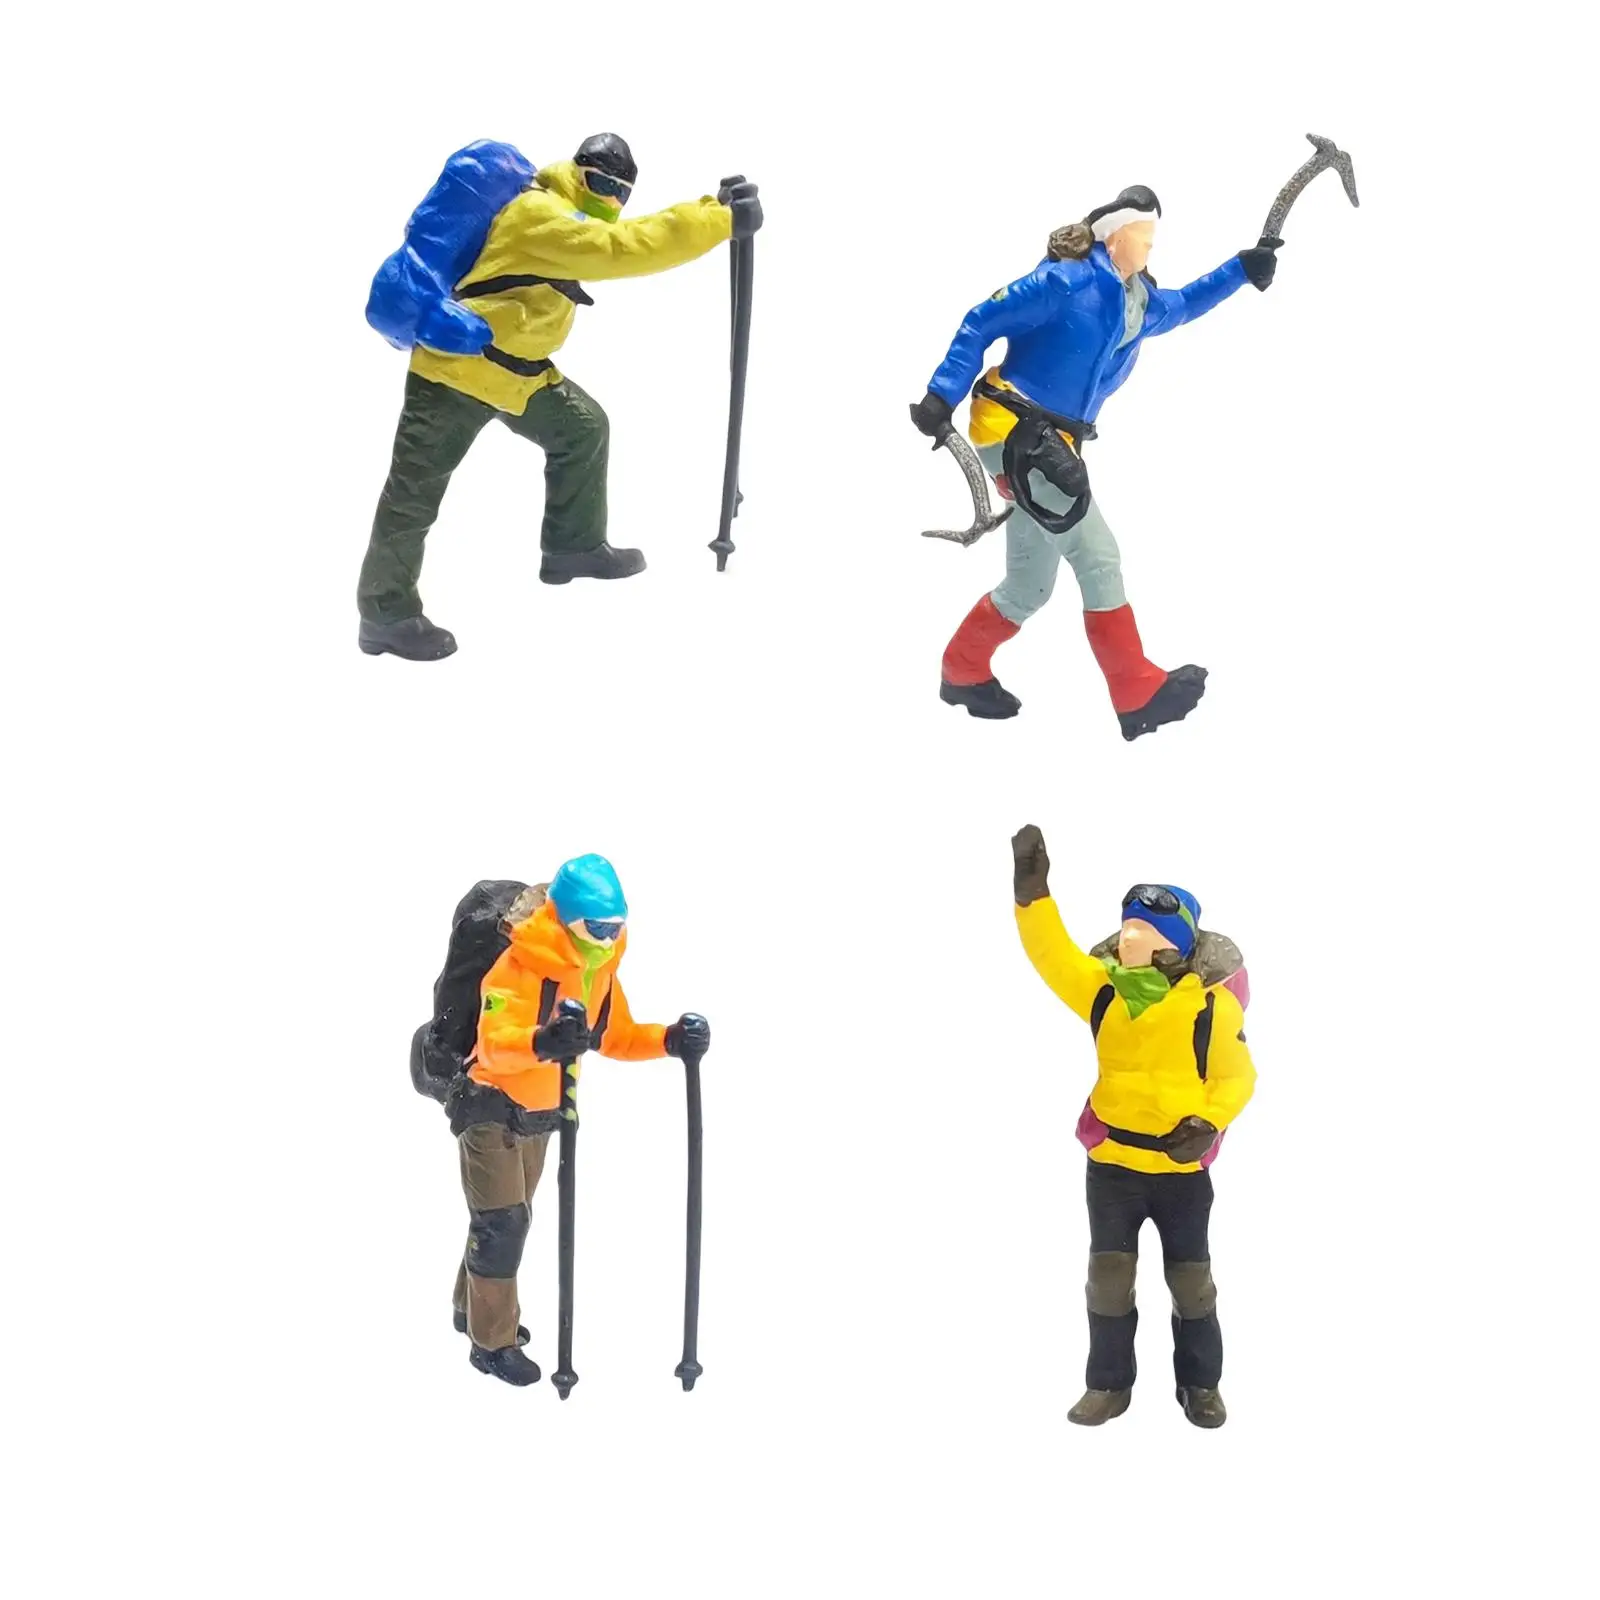 Resin 1/64 Climbing People Figurines Mountaineering People Figurines Ornament for Diorama DIY Scene Dollhouse Layout Decor